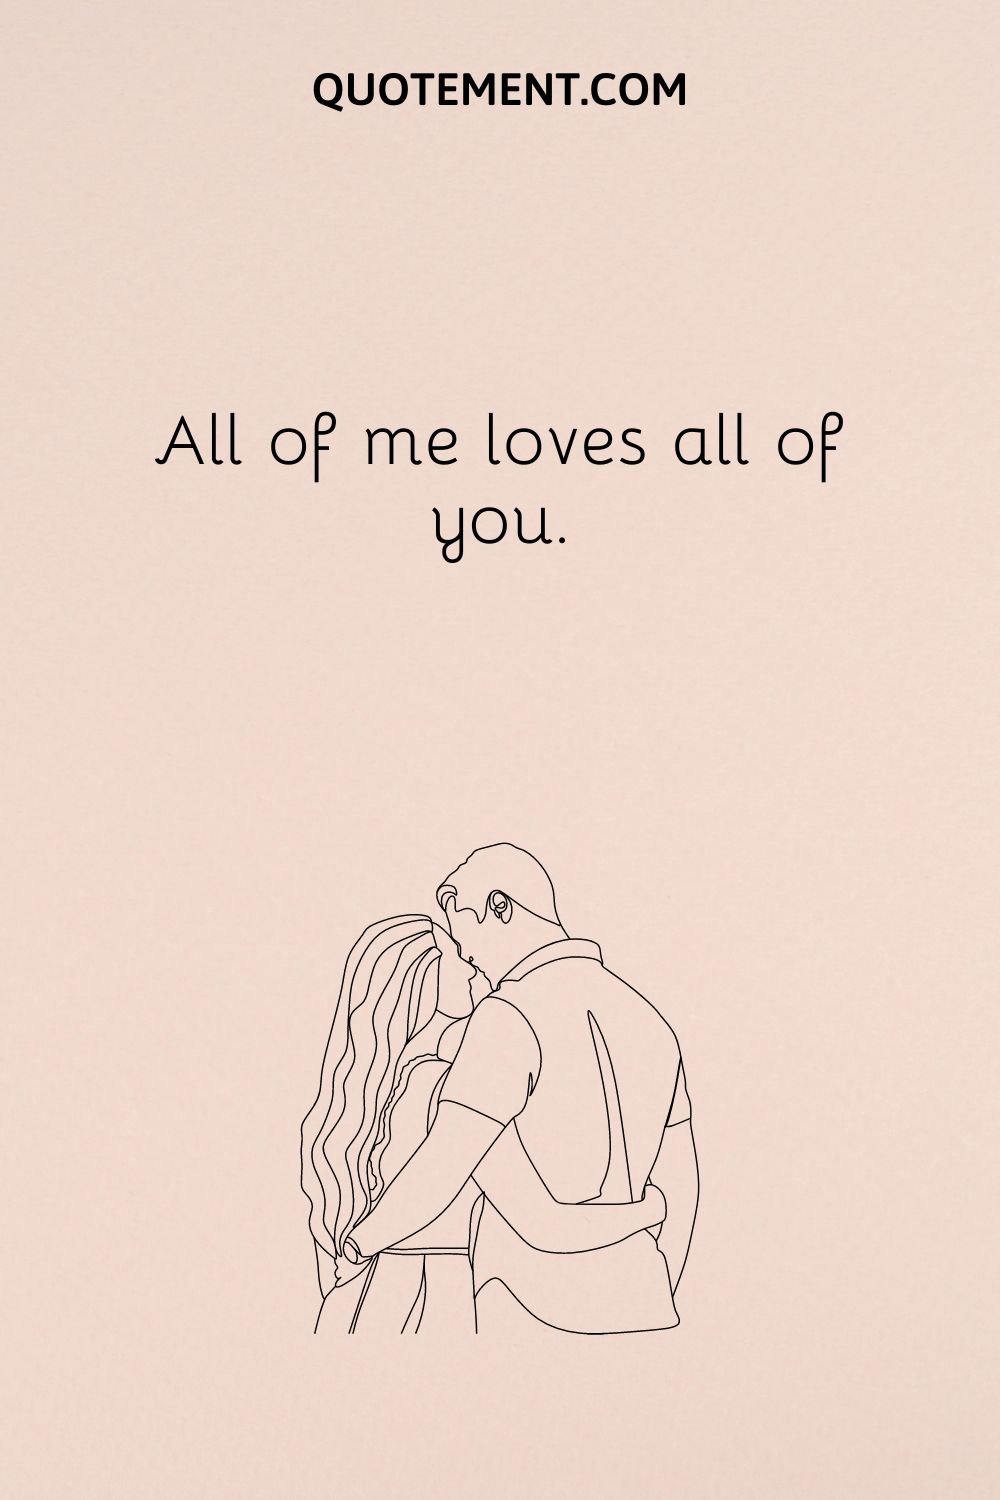 All of me loves all of you.